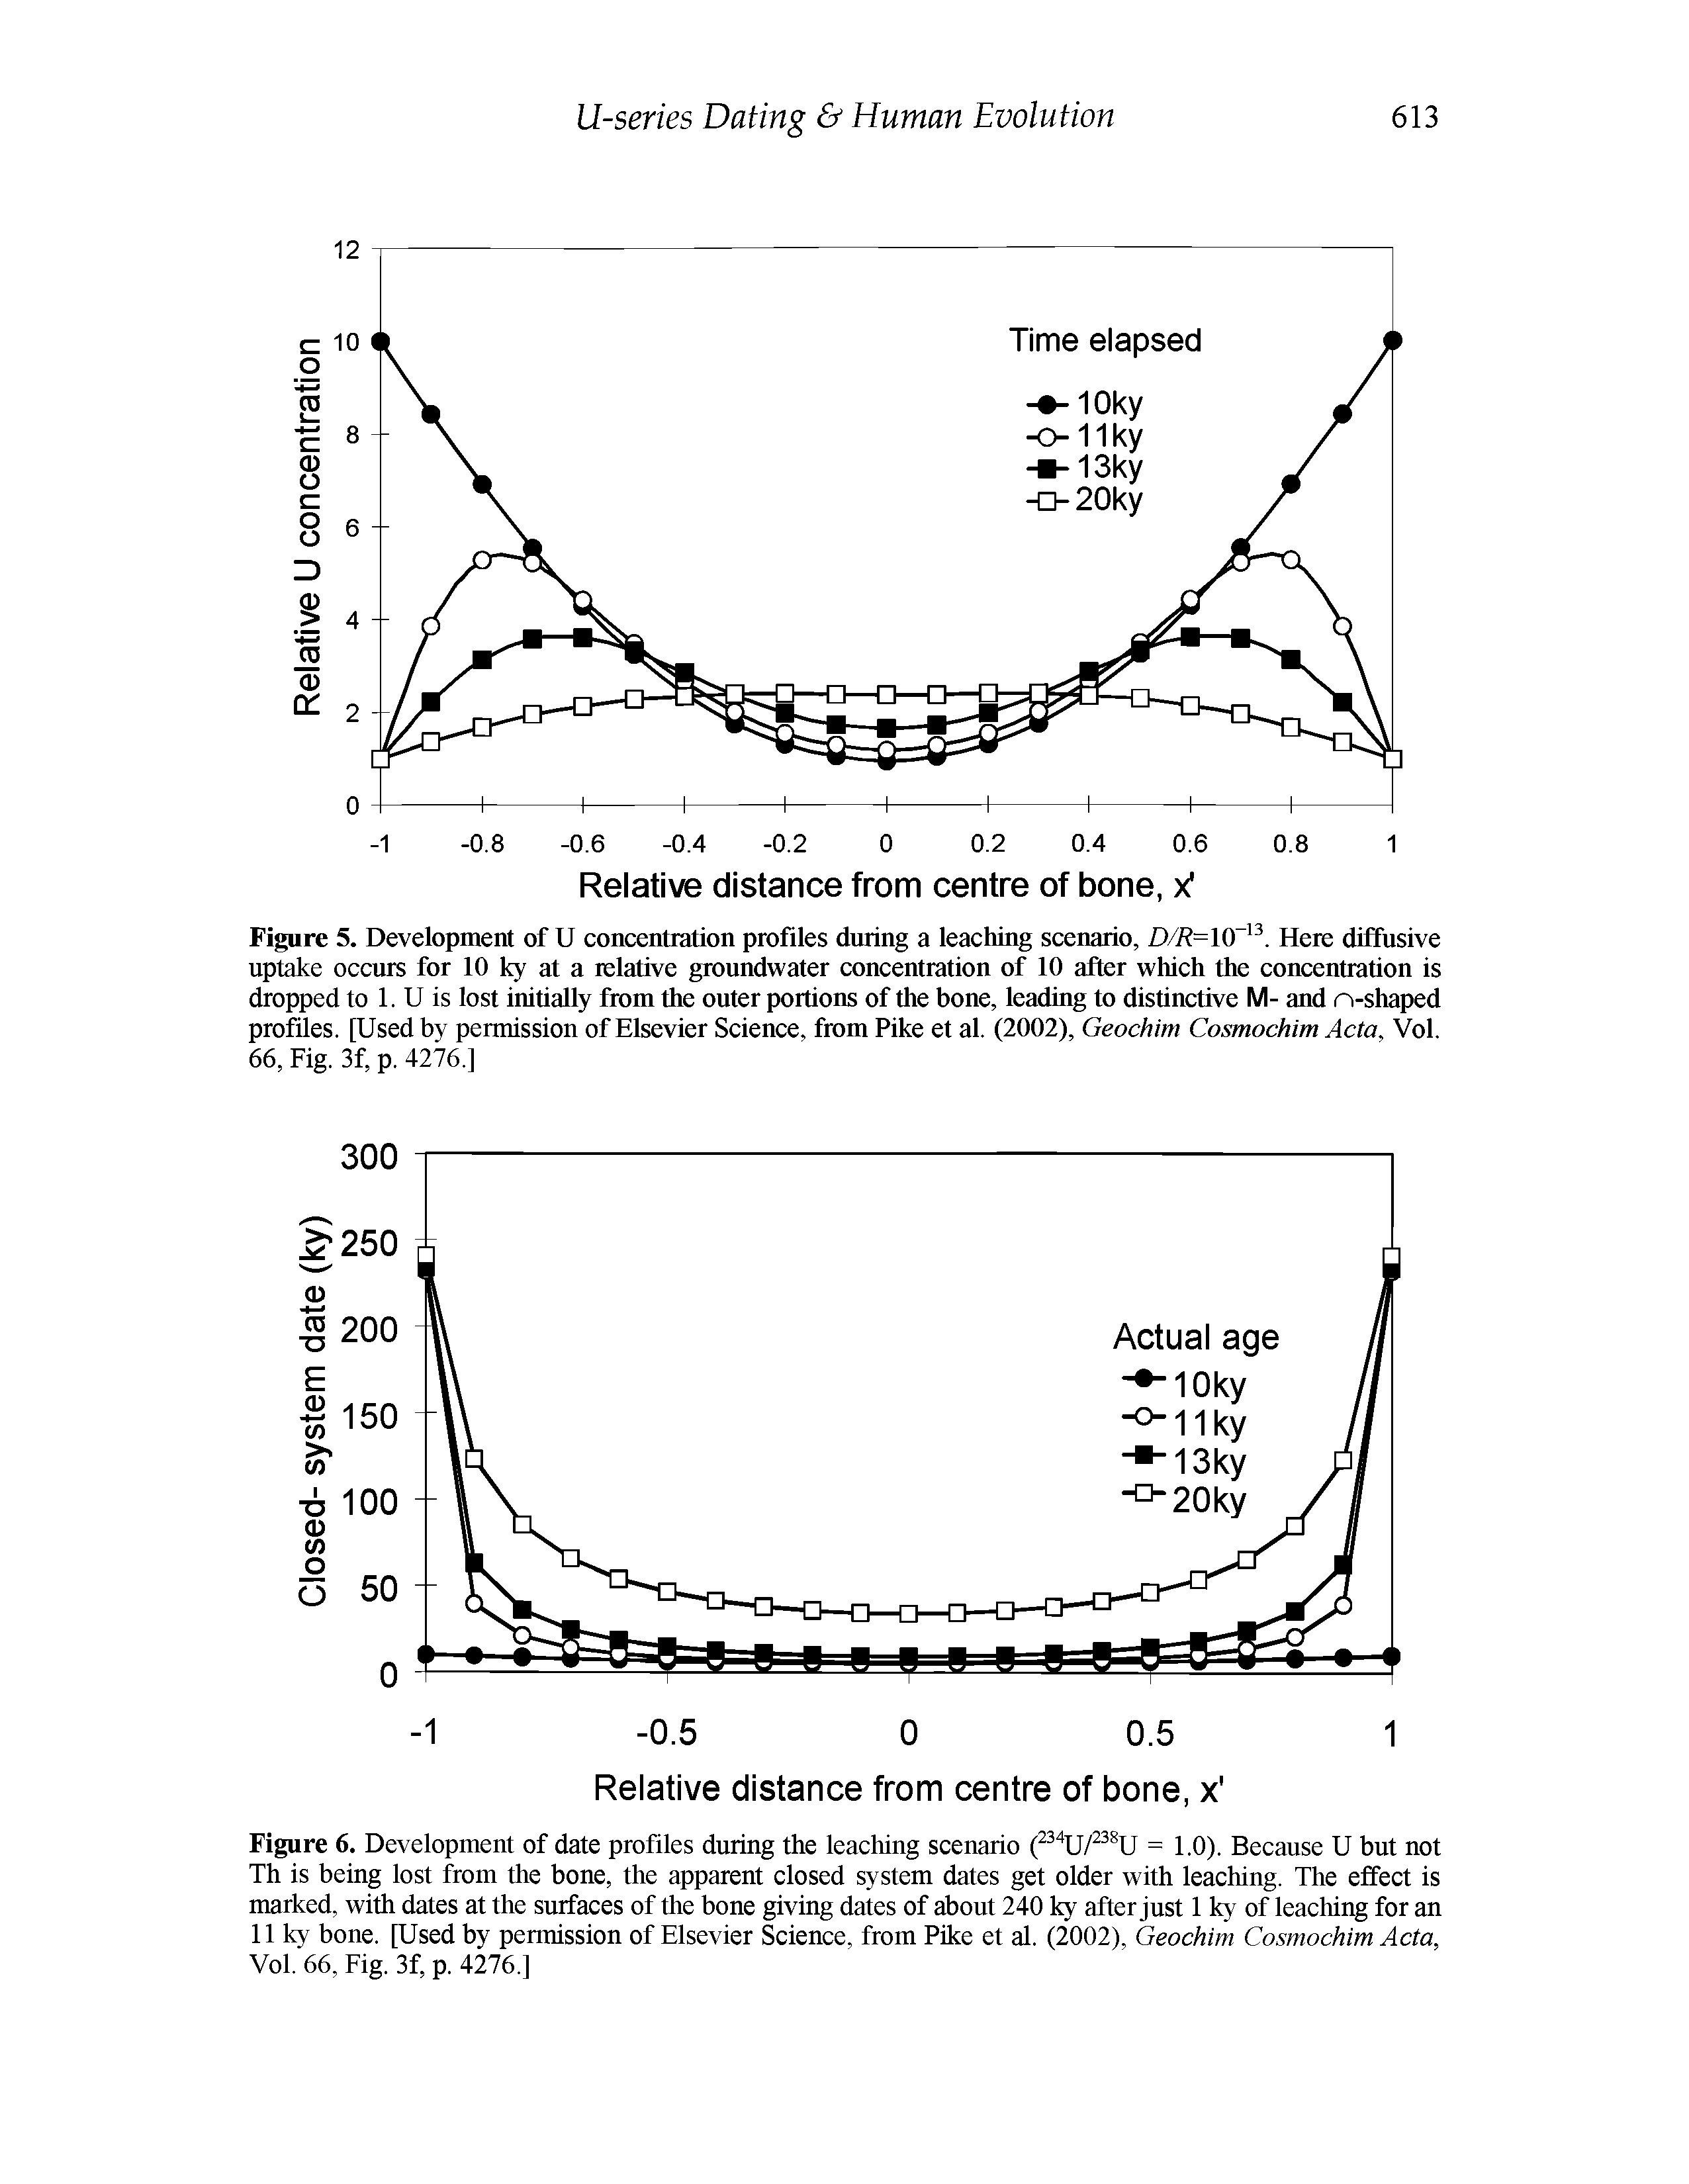 Figure 5. Development of U concentration profiles during a leaching scenario, D/R=10. Here diffusive uptake occurs for 10 ky at a relative groundwater concentration of 10 after which the concentration is dropped to 1. U is lost initially from the outer portions of the bone, leading to distinctive M- and n-shaped profiles. [Used by permission of Elsevier Science, from Pike et al. (2002), Geochim Cosmochim Acta, Vol. 66, Fig. 3f, p. 4276.]...